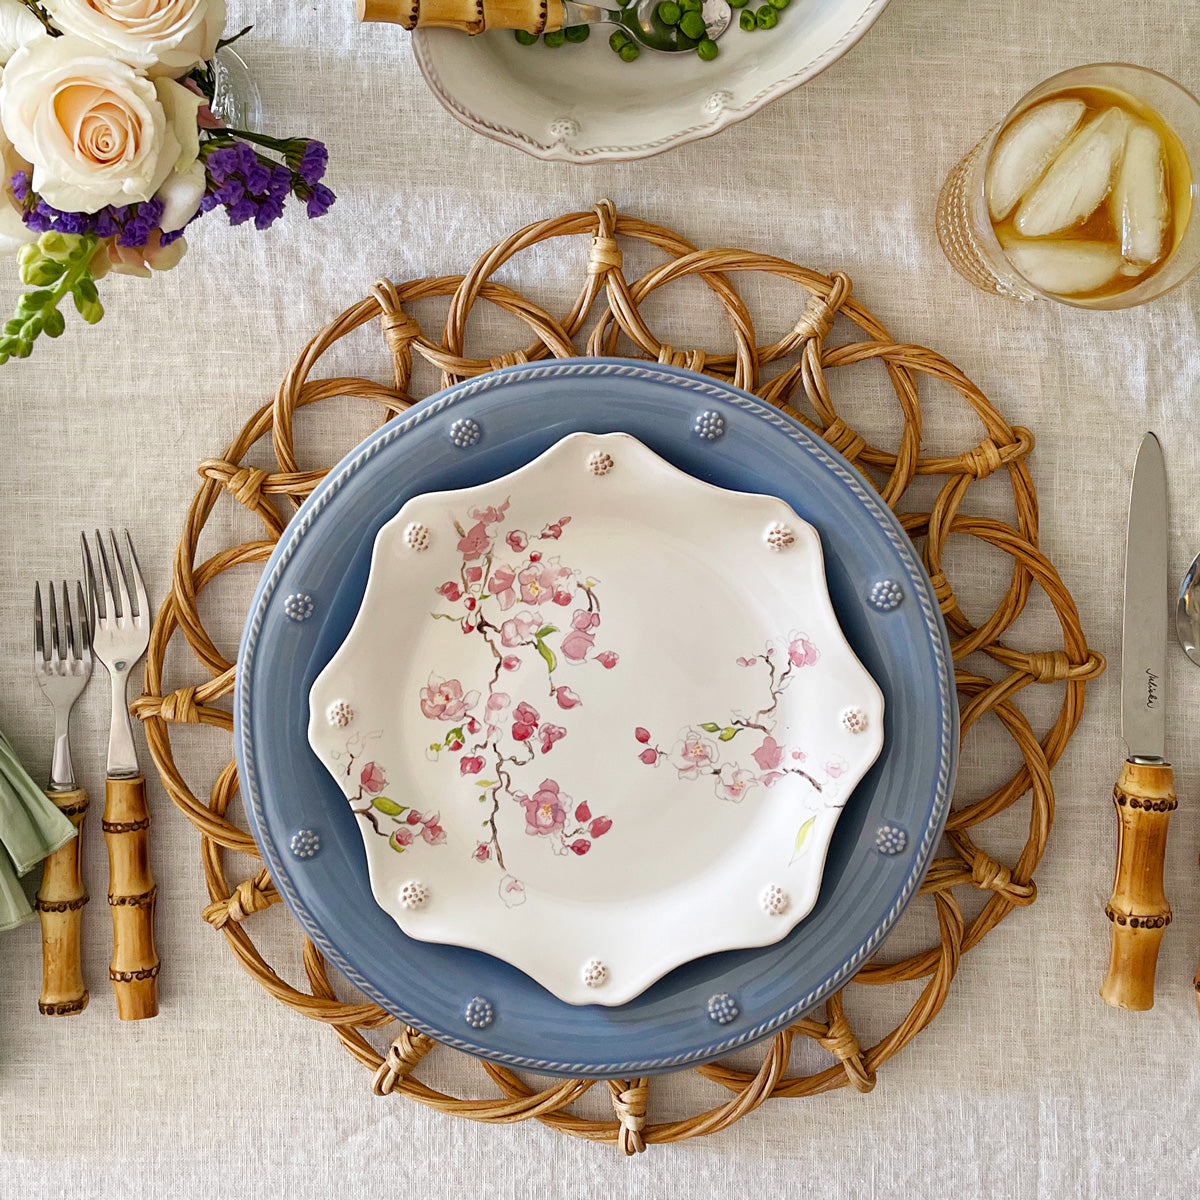 Mix and match your table setting with Berry \u0026 Thread's collection.